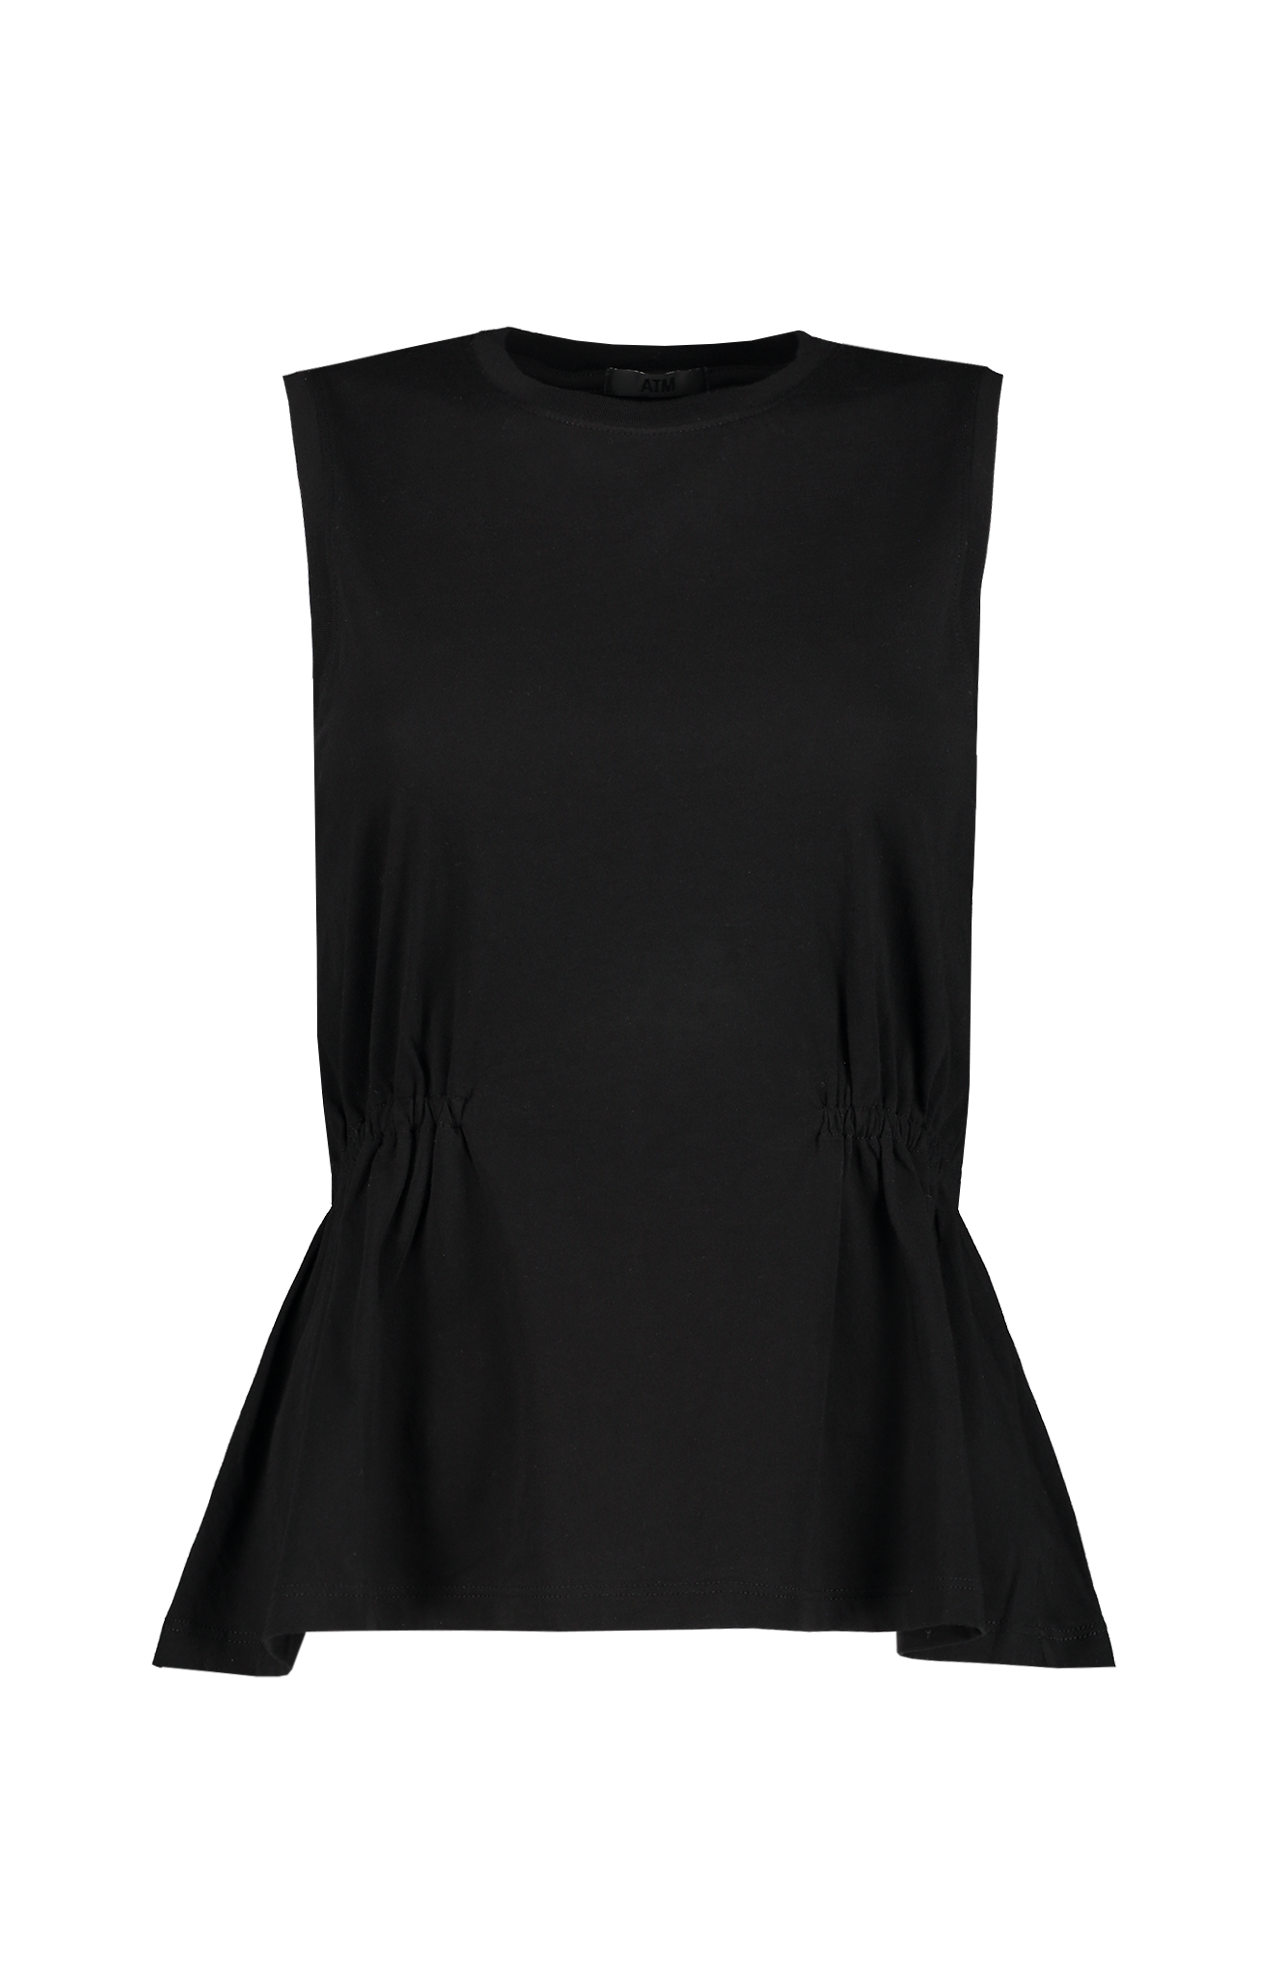 ATM Classic Jersey Sleeveless Cinched Waist Top Black Front Mannequin Image (6990469562483)